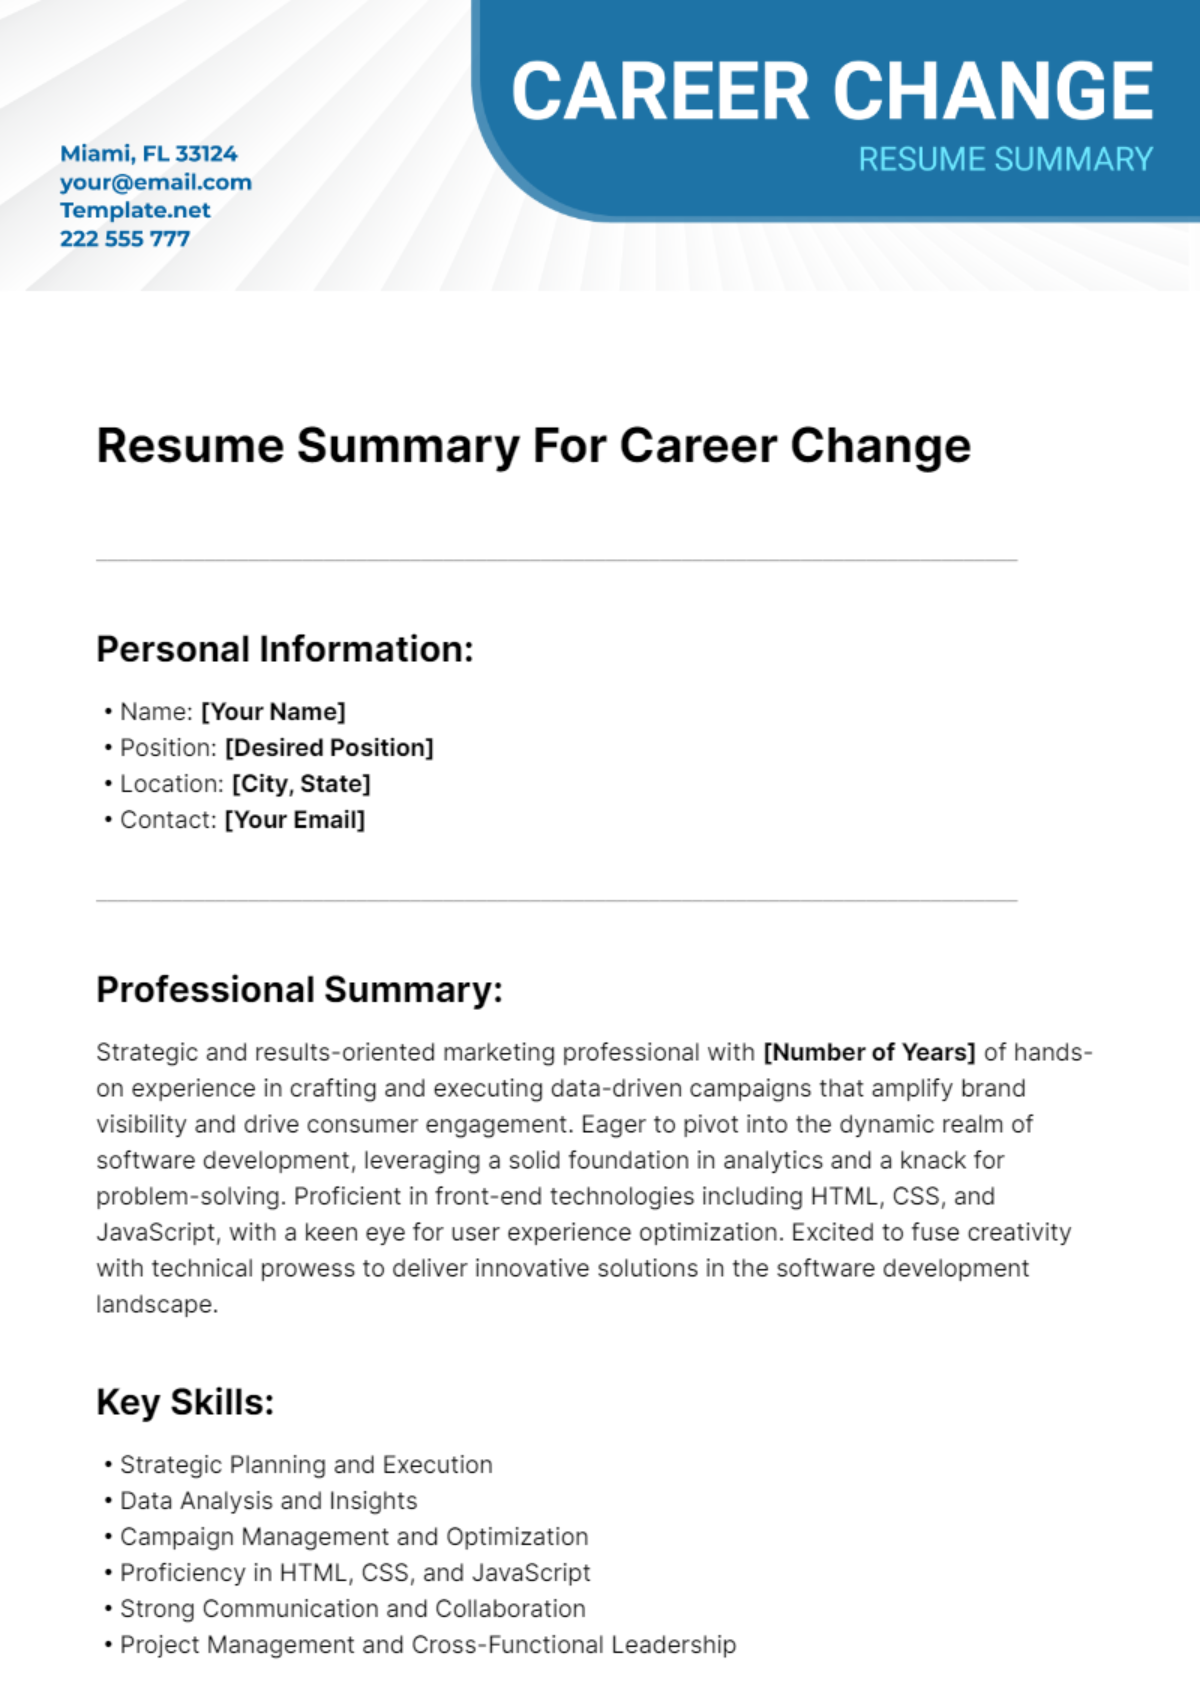 Resume Summary For Career Change Template